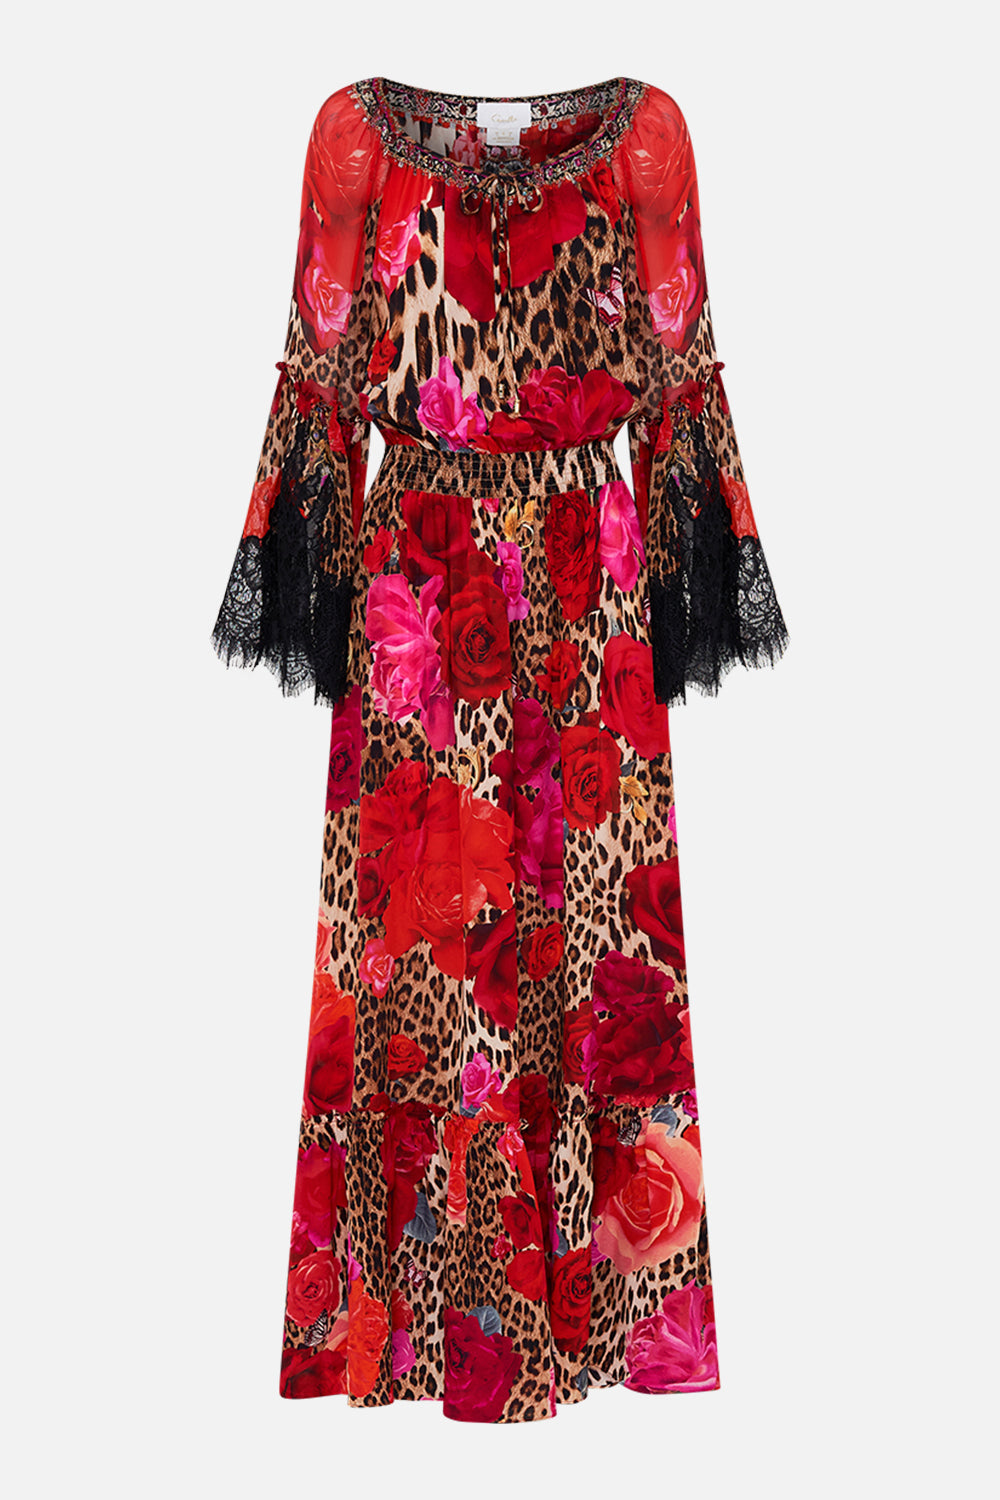 Product view of CAMILLA floral silk maxi drress in Heart Like A Wildflower print 